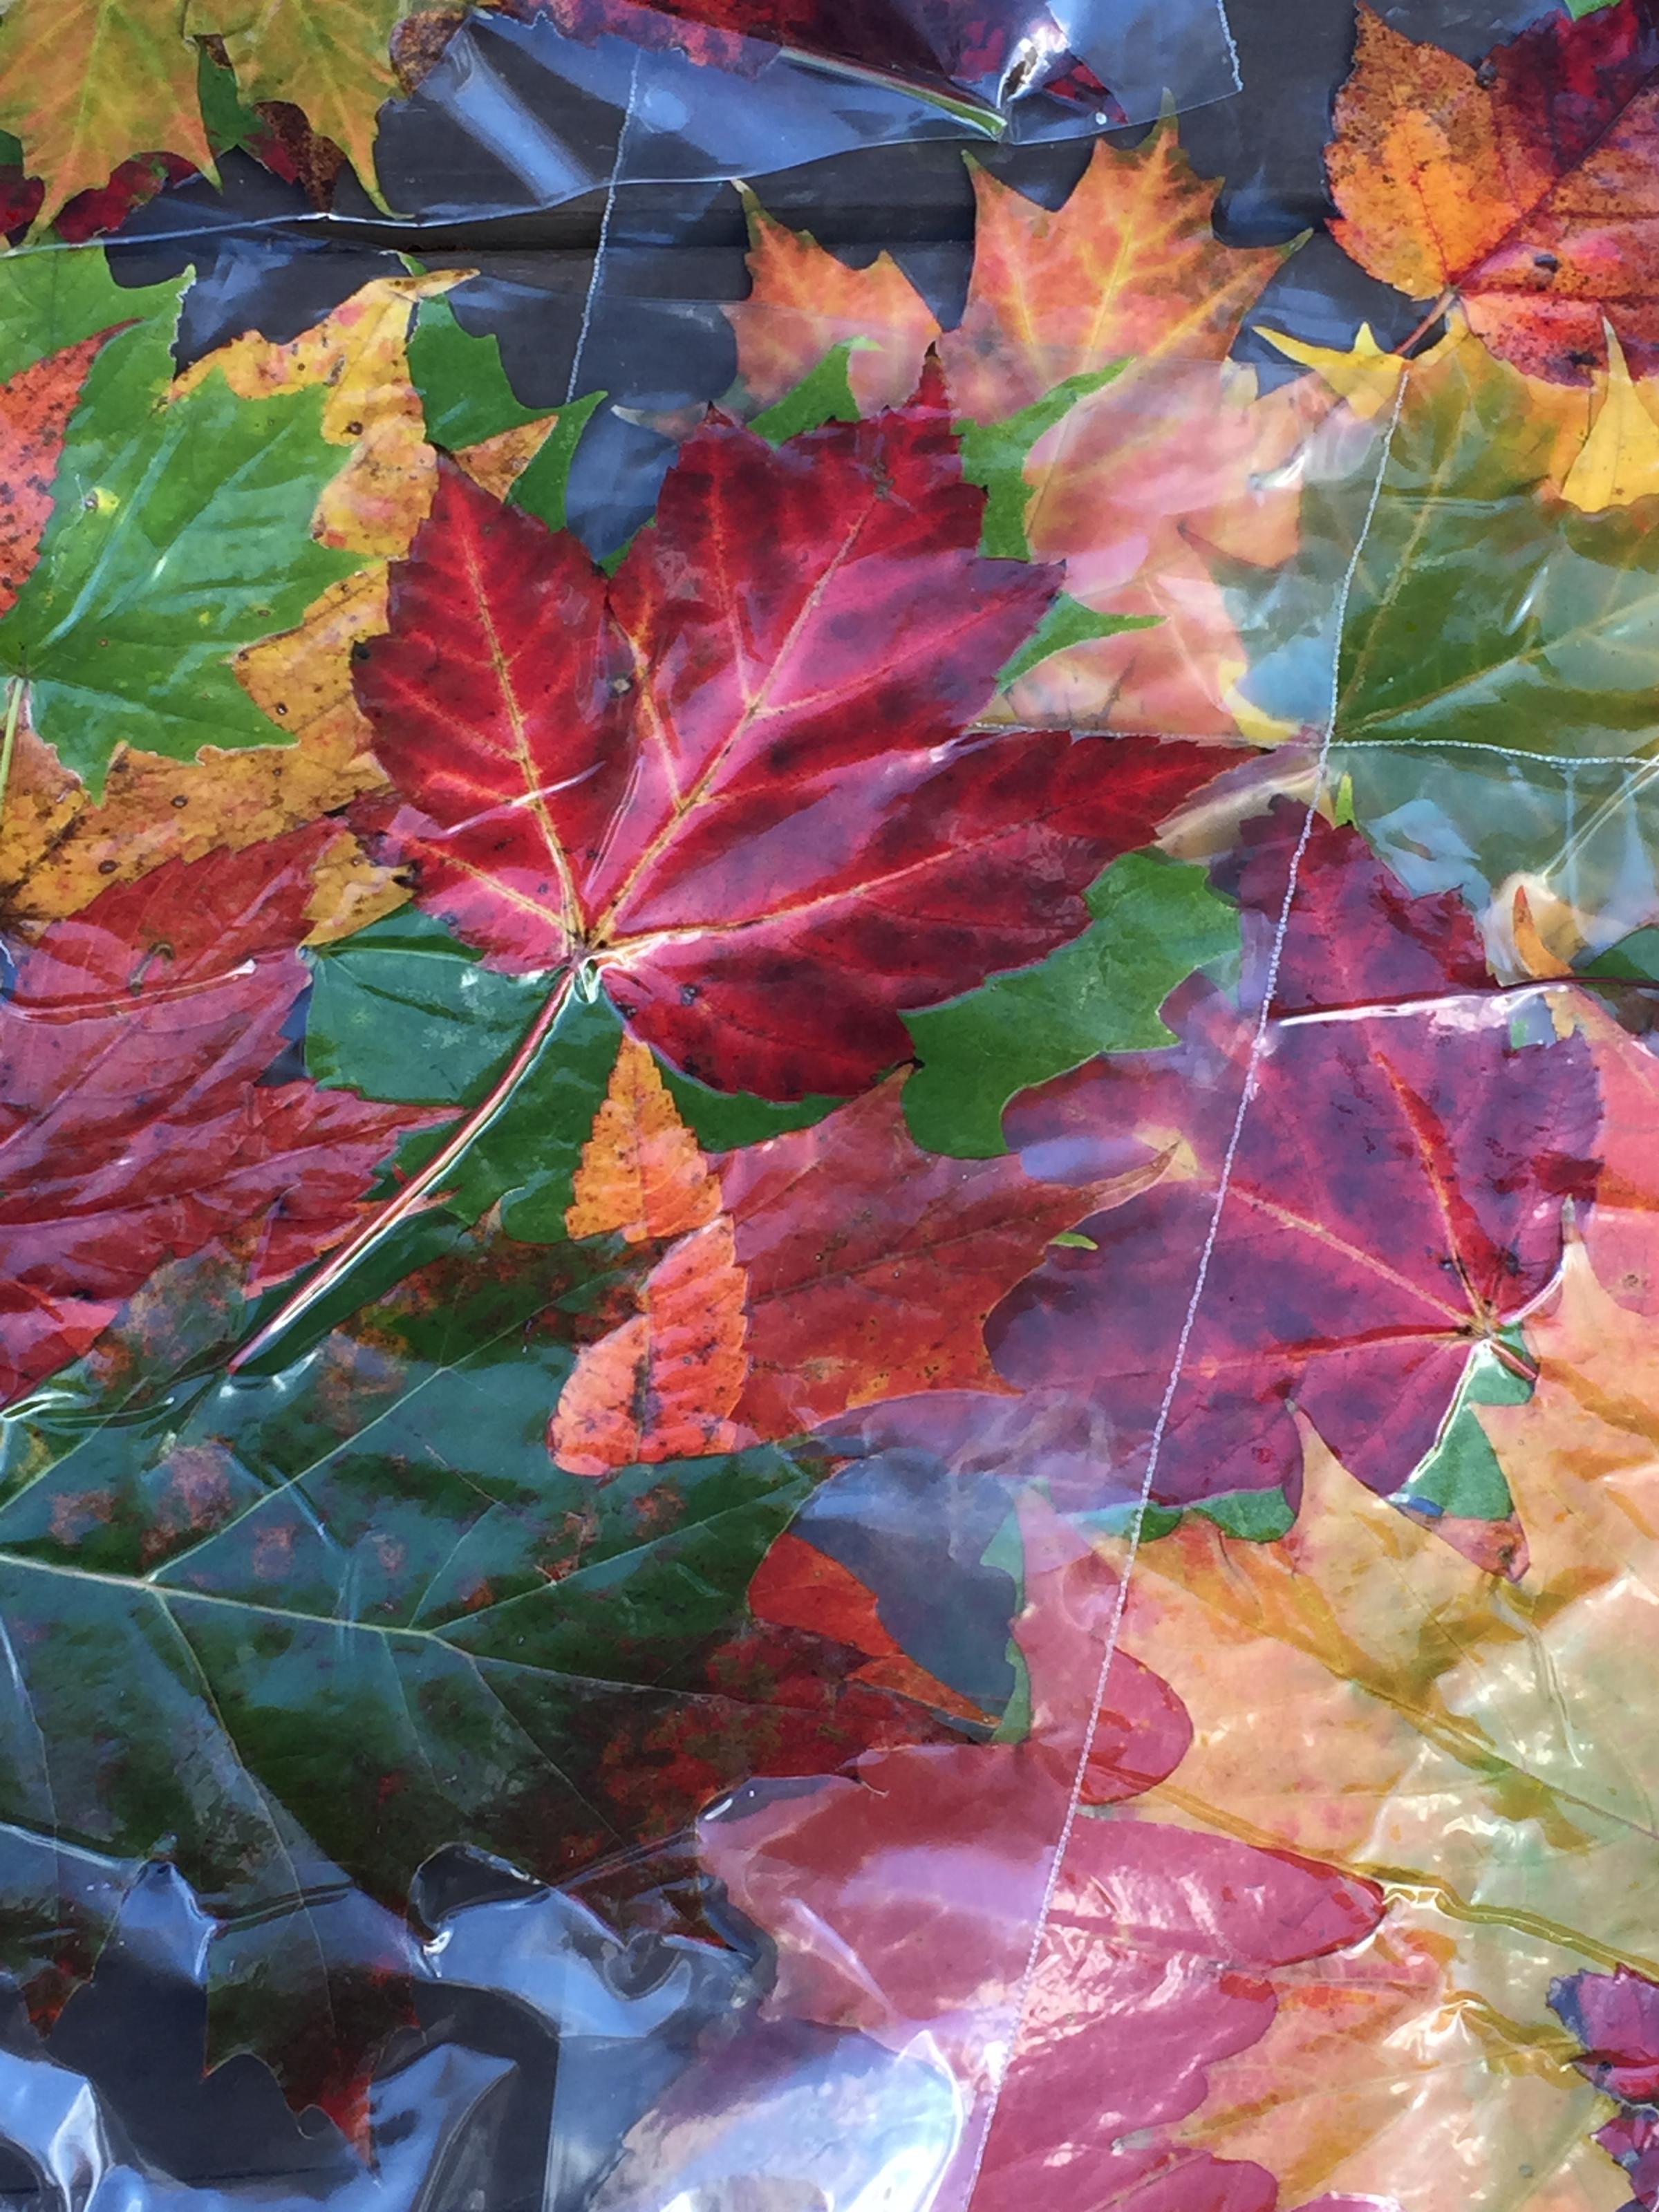 Foliage For Sale: Vermont Business Exports Colorful Leaves | Vermont ...